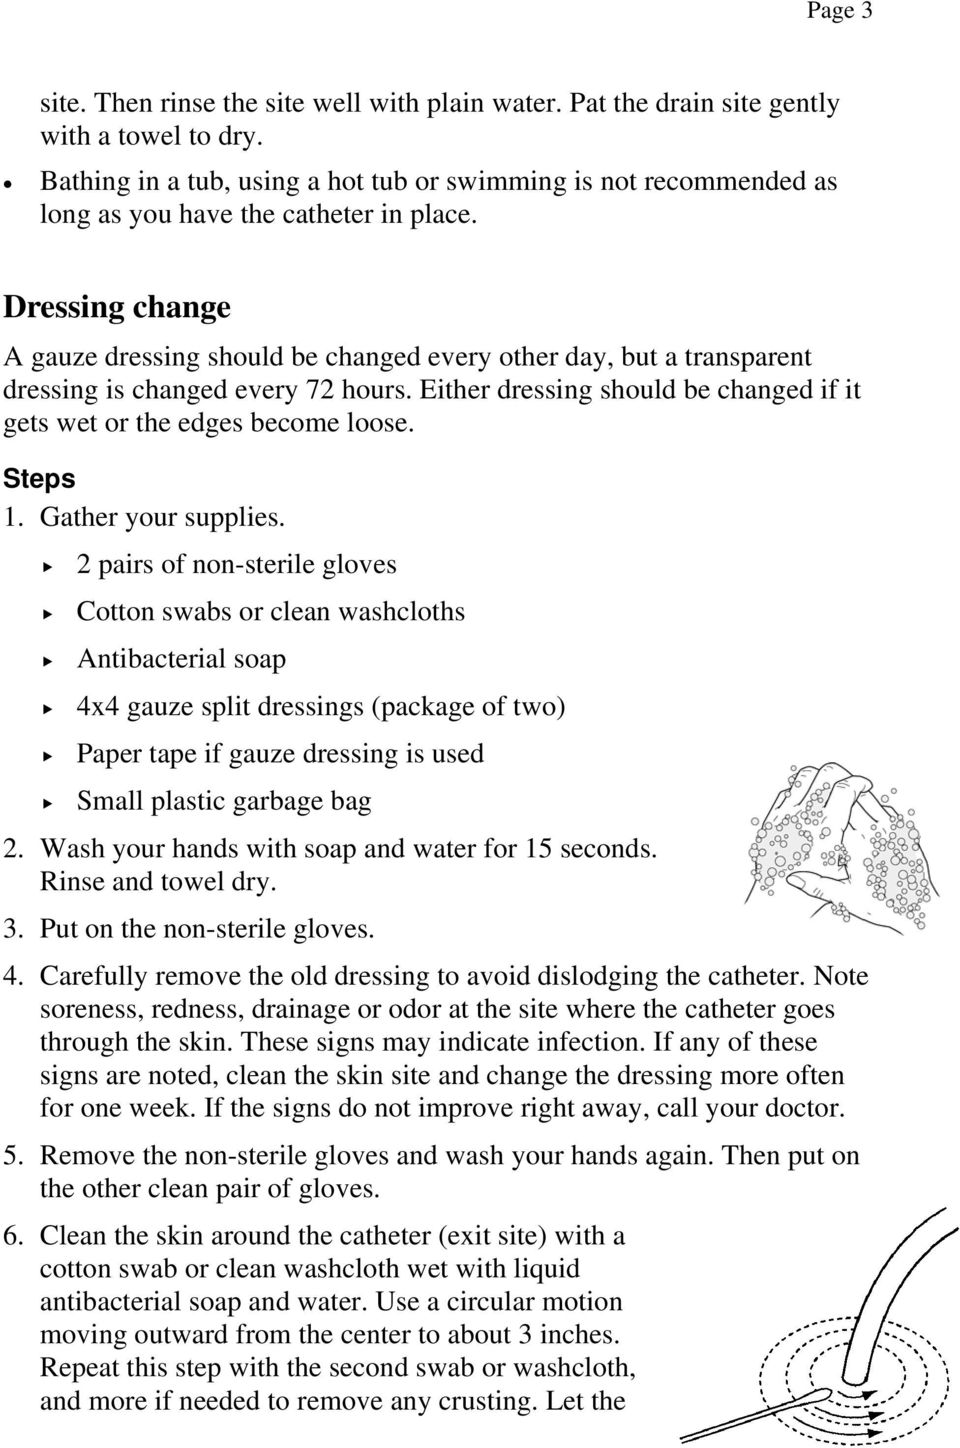 Dressing change A gauze dressing should be changed every other day, but a transparent dressing is changed every 72 hours. Either dressing should be changed if it gets wet or the edges become loose.